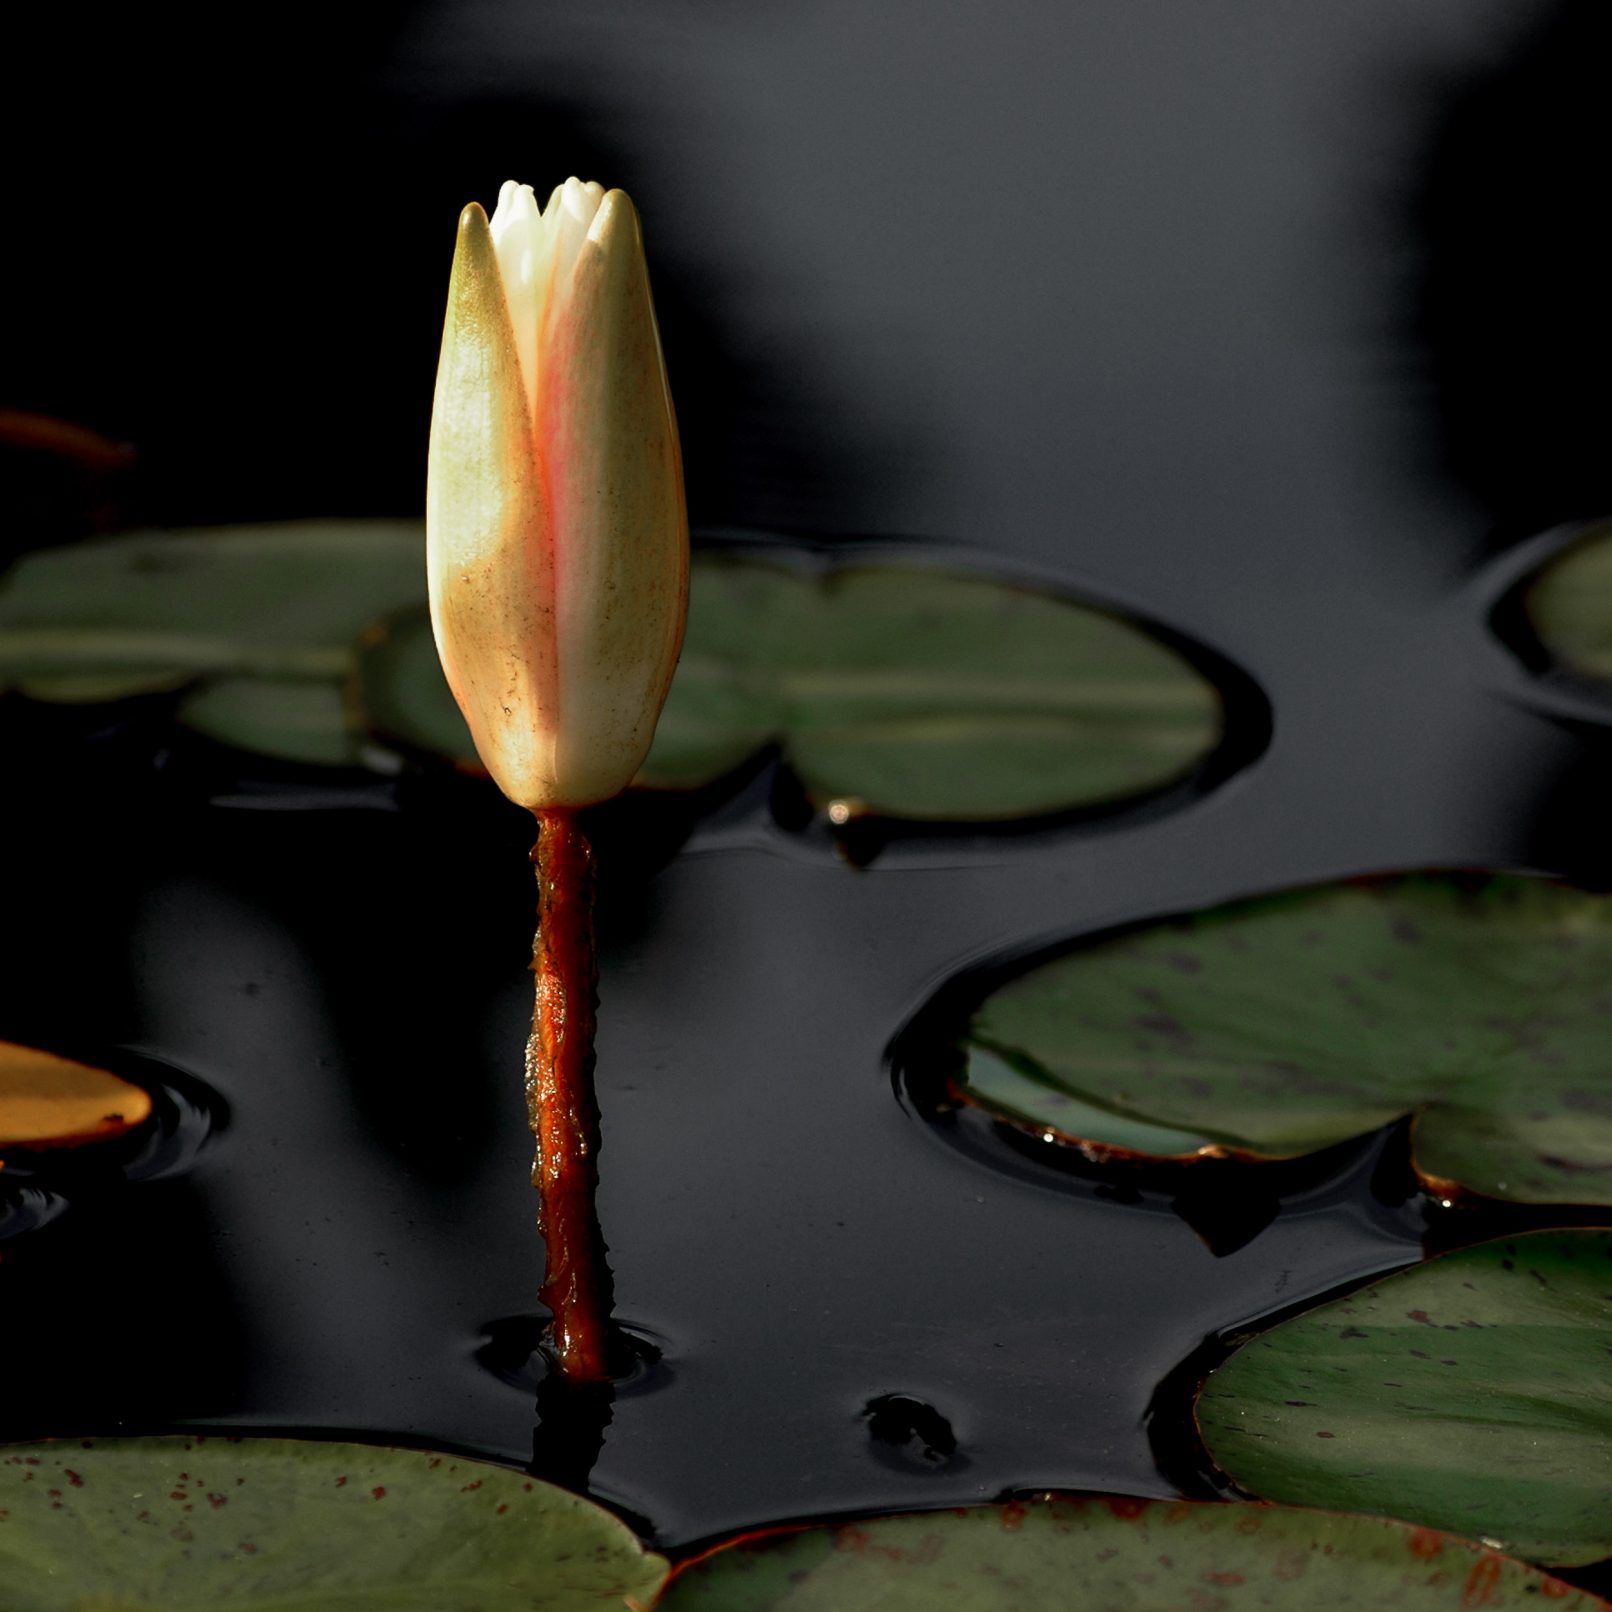 Closed flower in water with lily pads